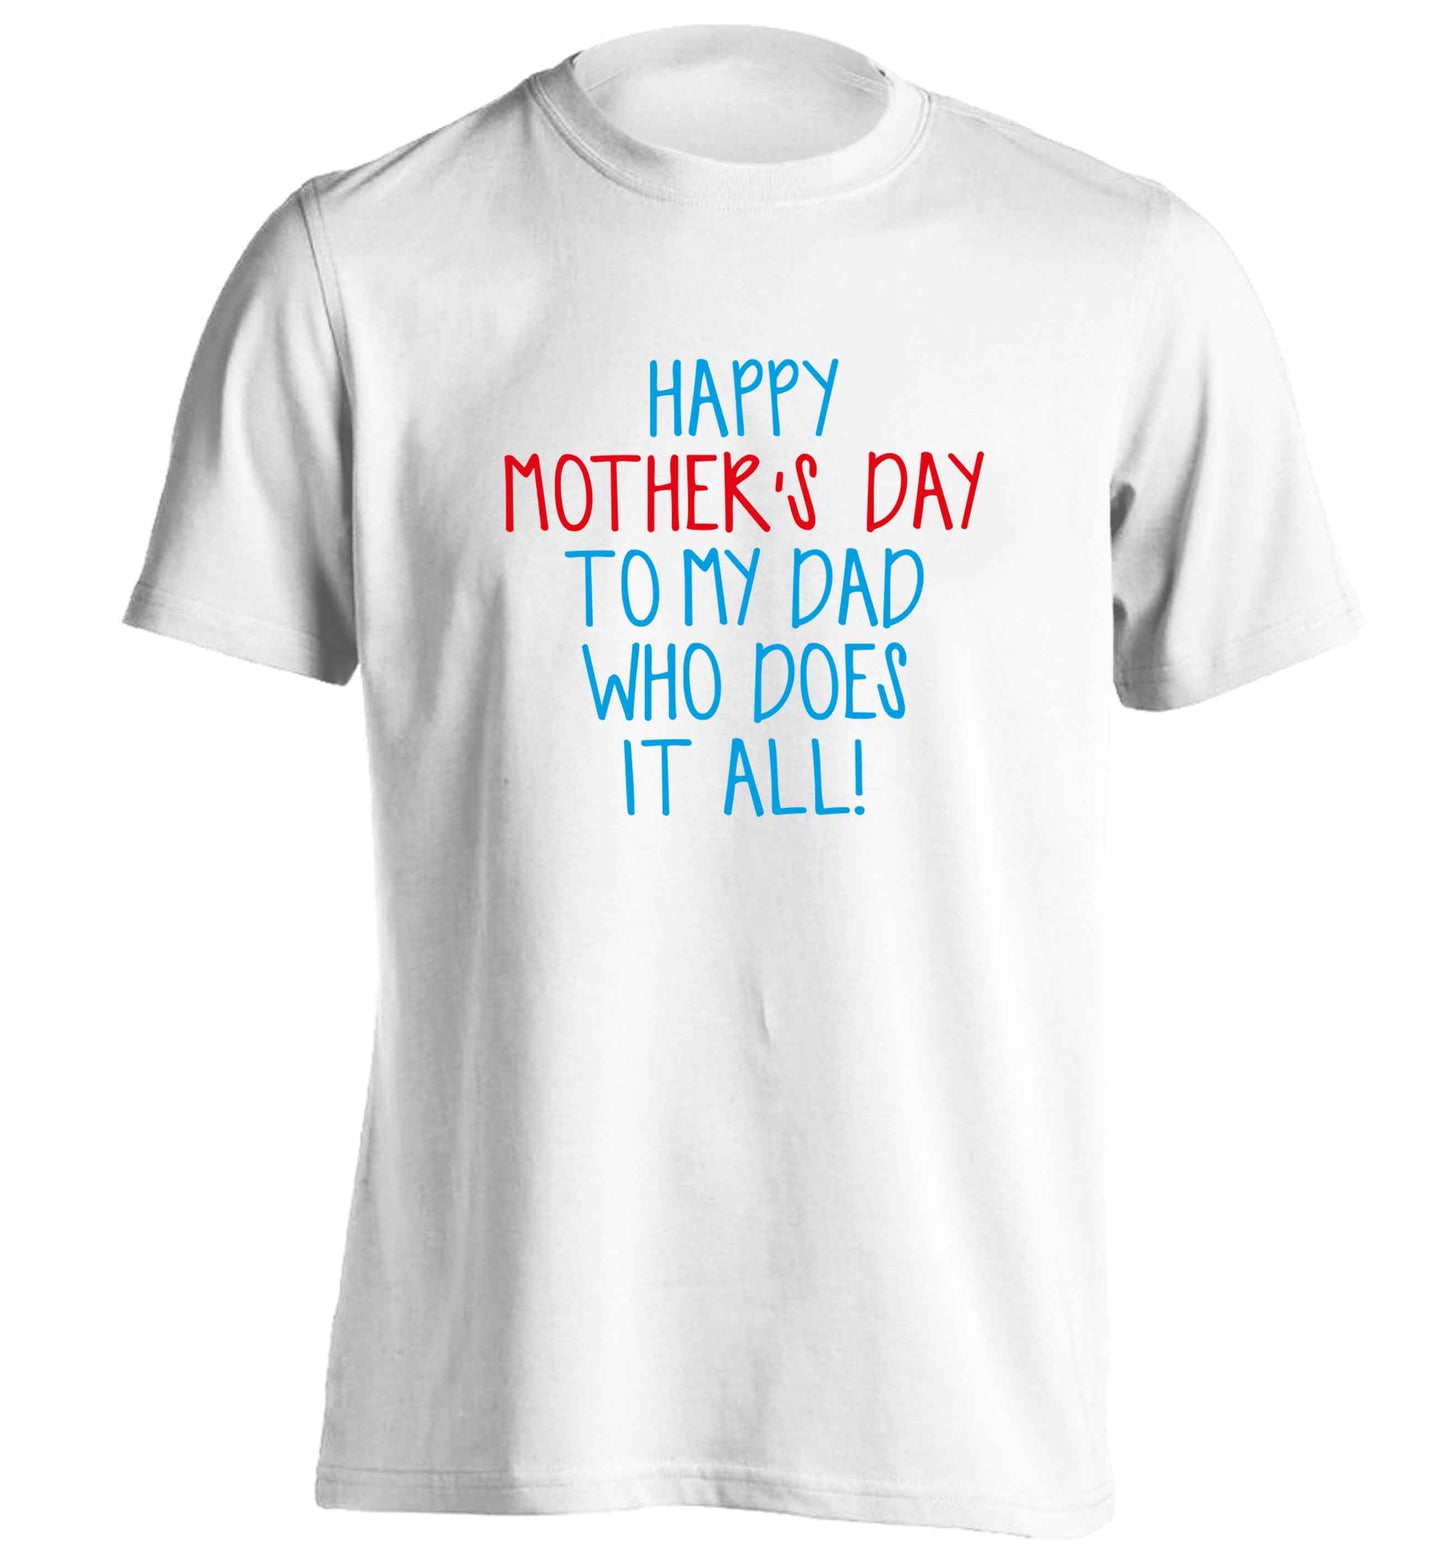 Happy mother's day to my dad who does it all! adults unisex white Tshirt 2XL